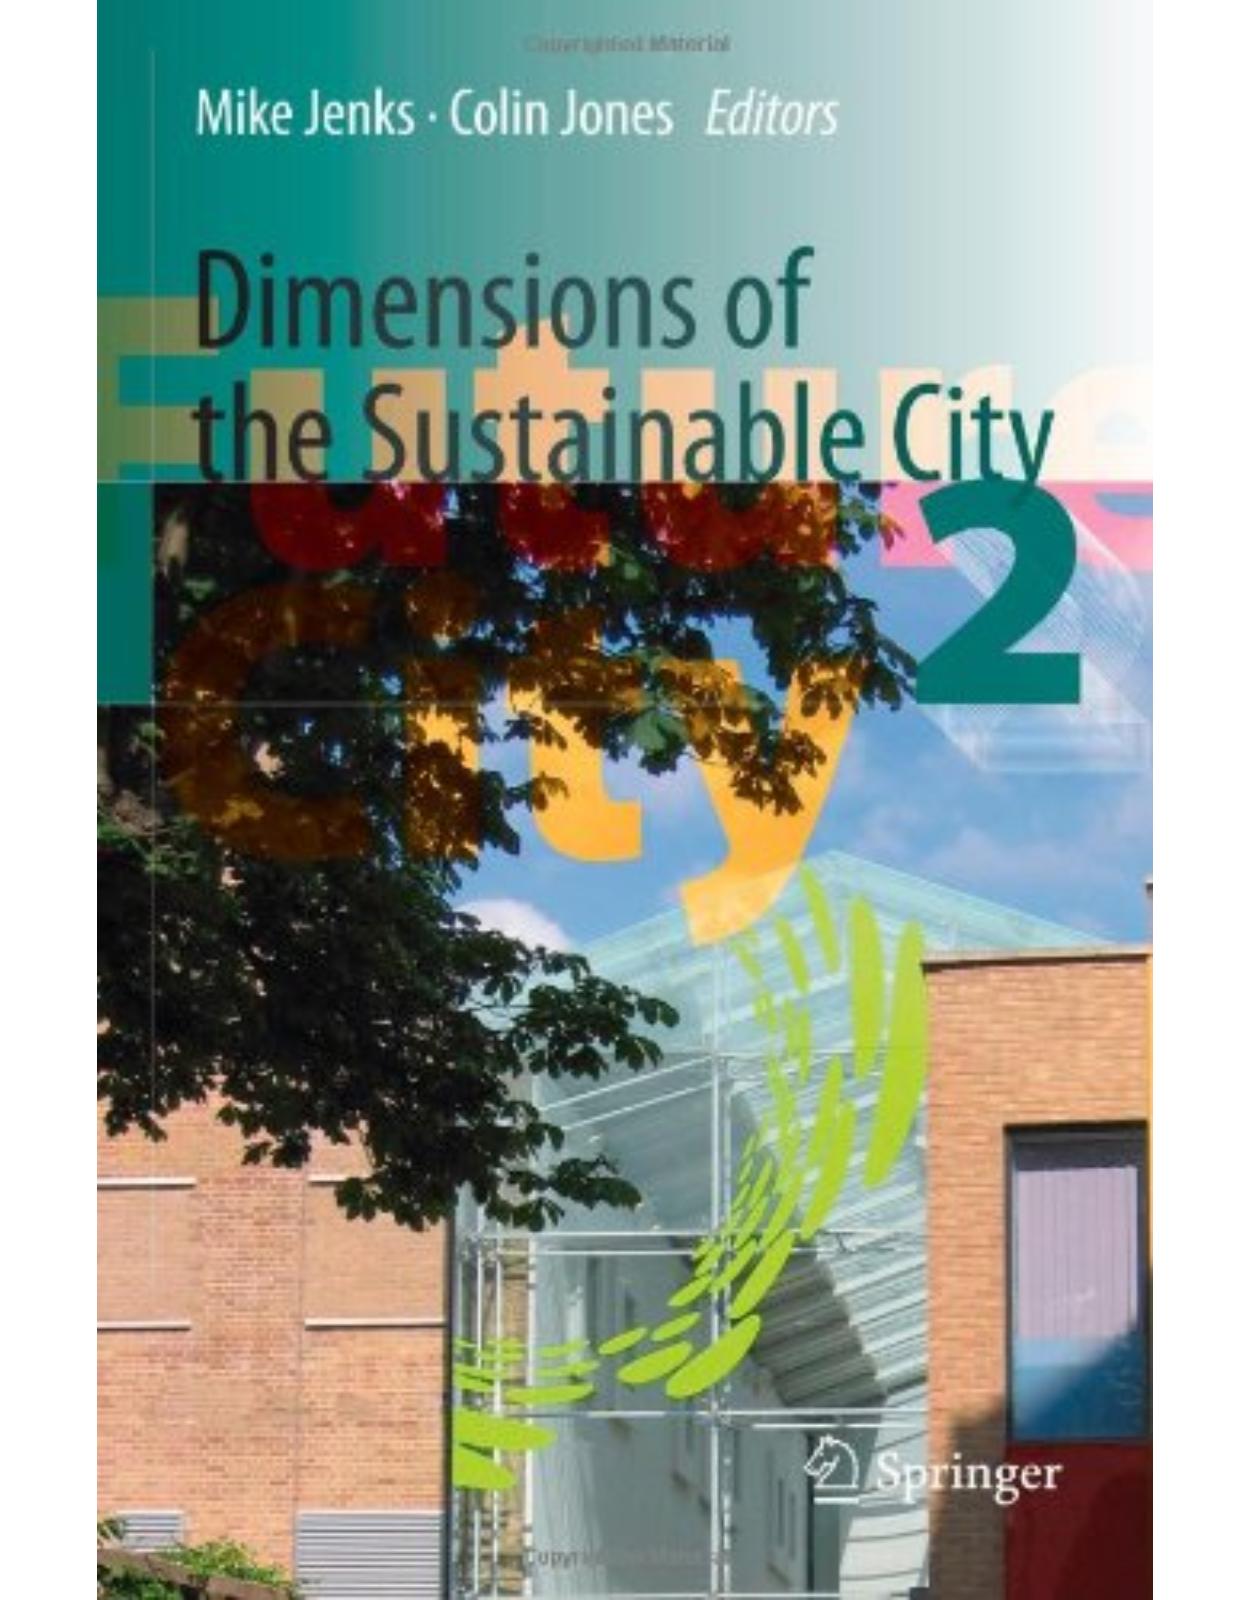 Dimensions of the Sustainable City (Future City)